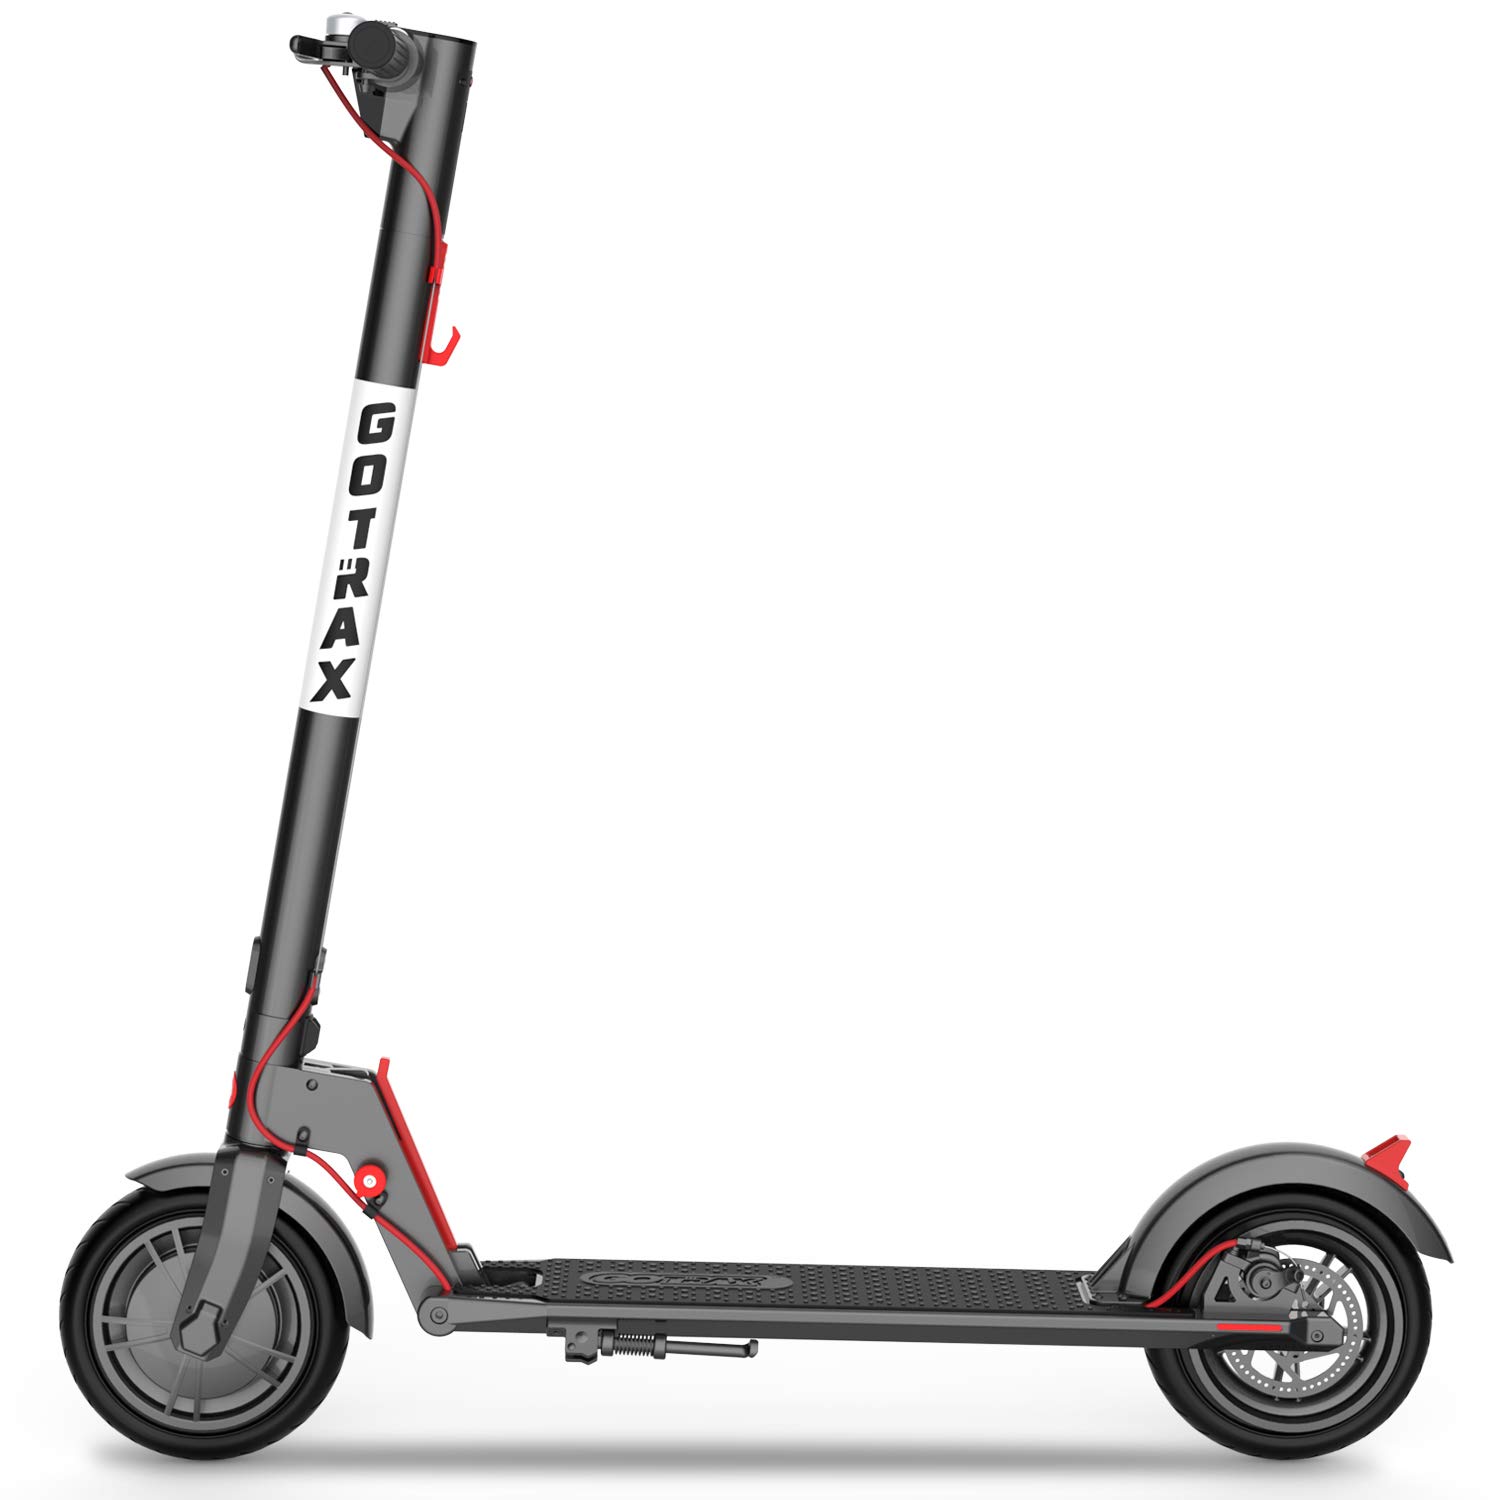 Amazon: Gotrax GXL V2 Commuting Electric Scooter Version 2 $248 + Free S/H